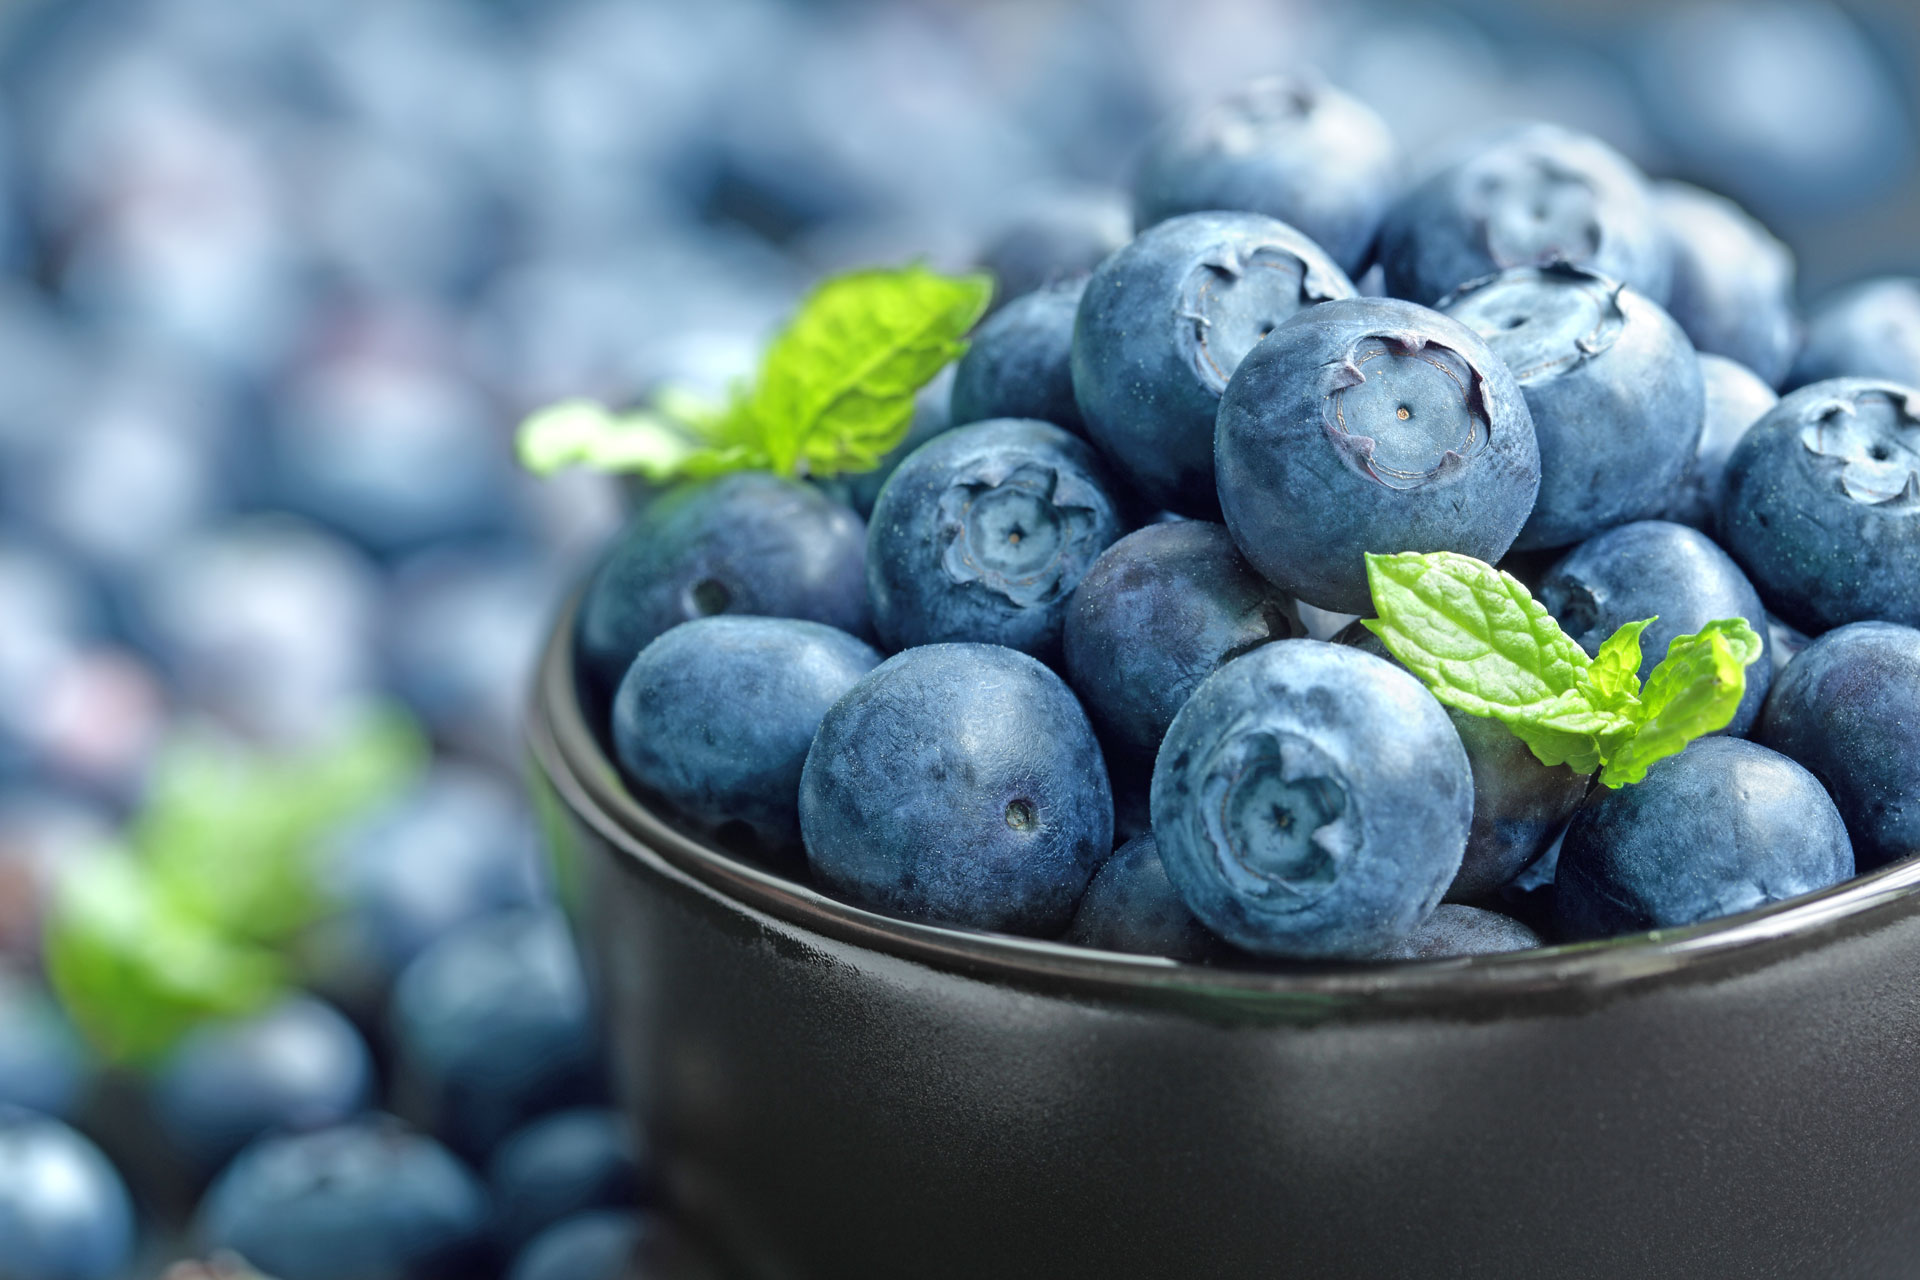 Blueberry Month at The Storage Inn